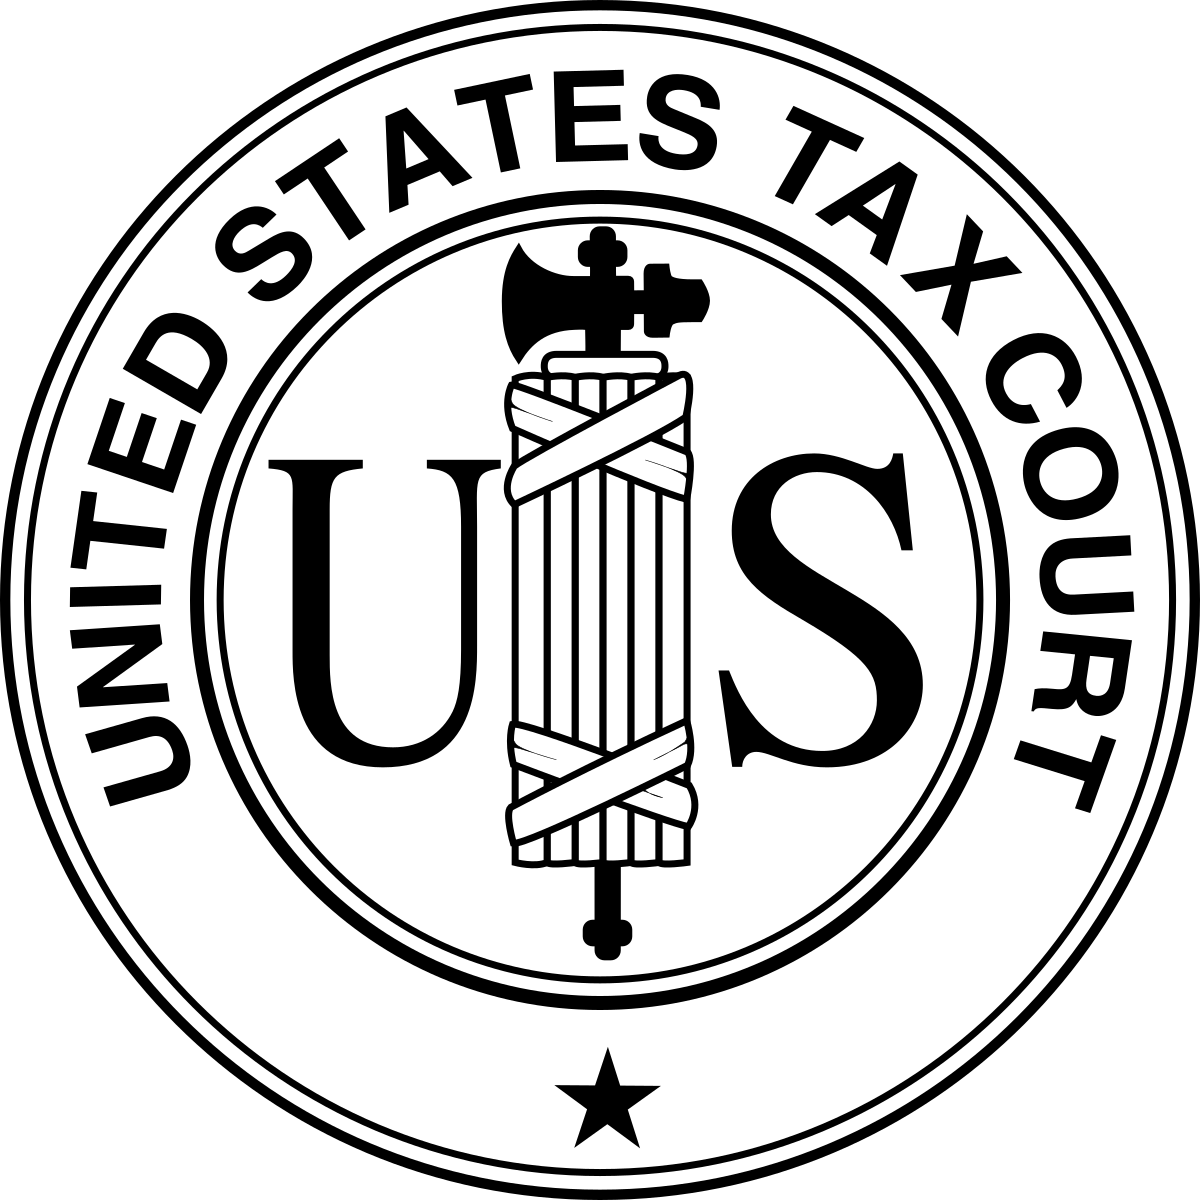 Discussion clipart judge panel. United states tax court